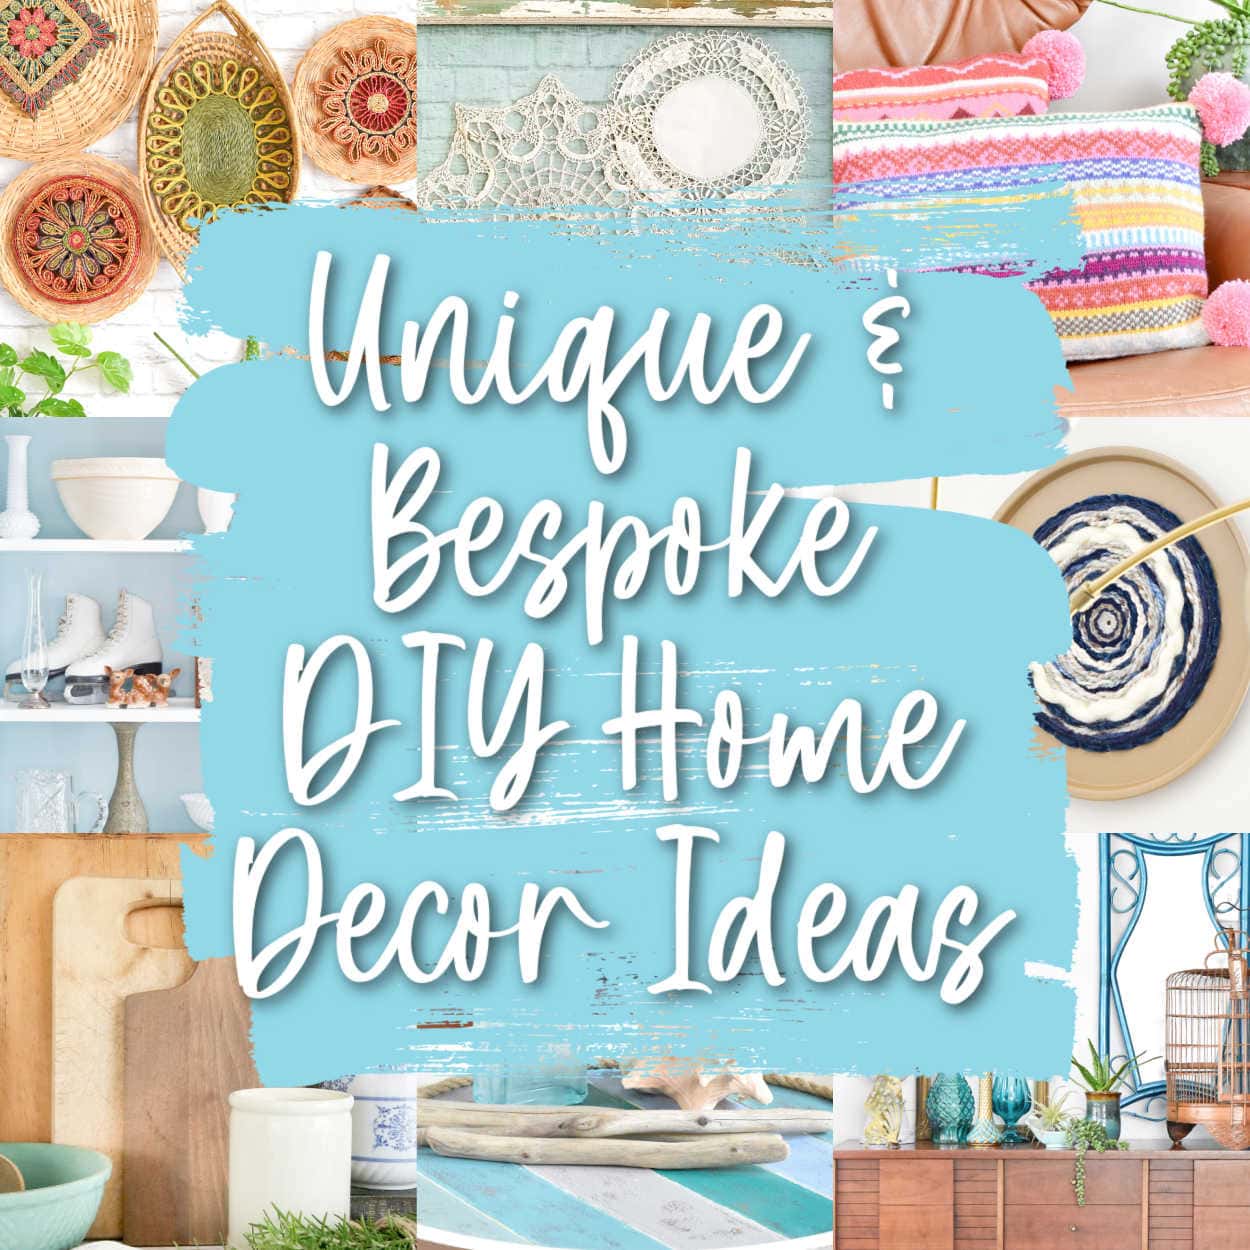 DIY Home Decor Ideas to Make Your Home Personal and Unique